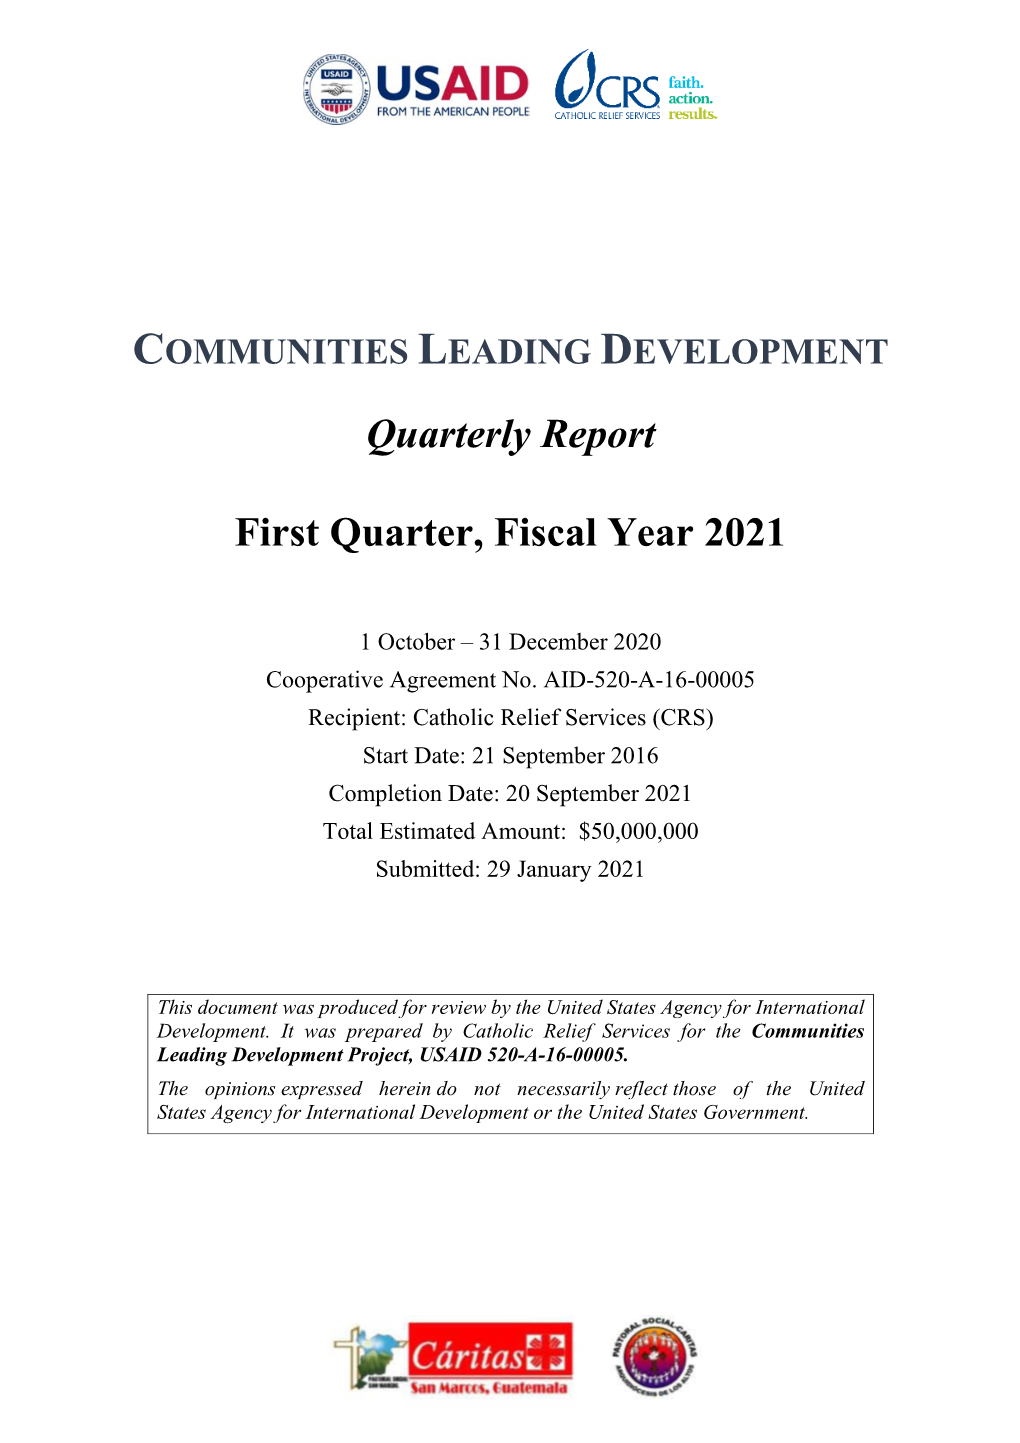 Quarterly Report First Quarter, Fiscal Year 2021